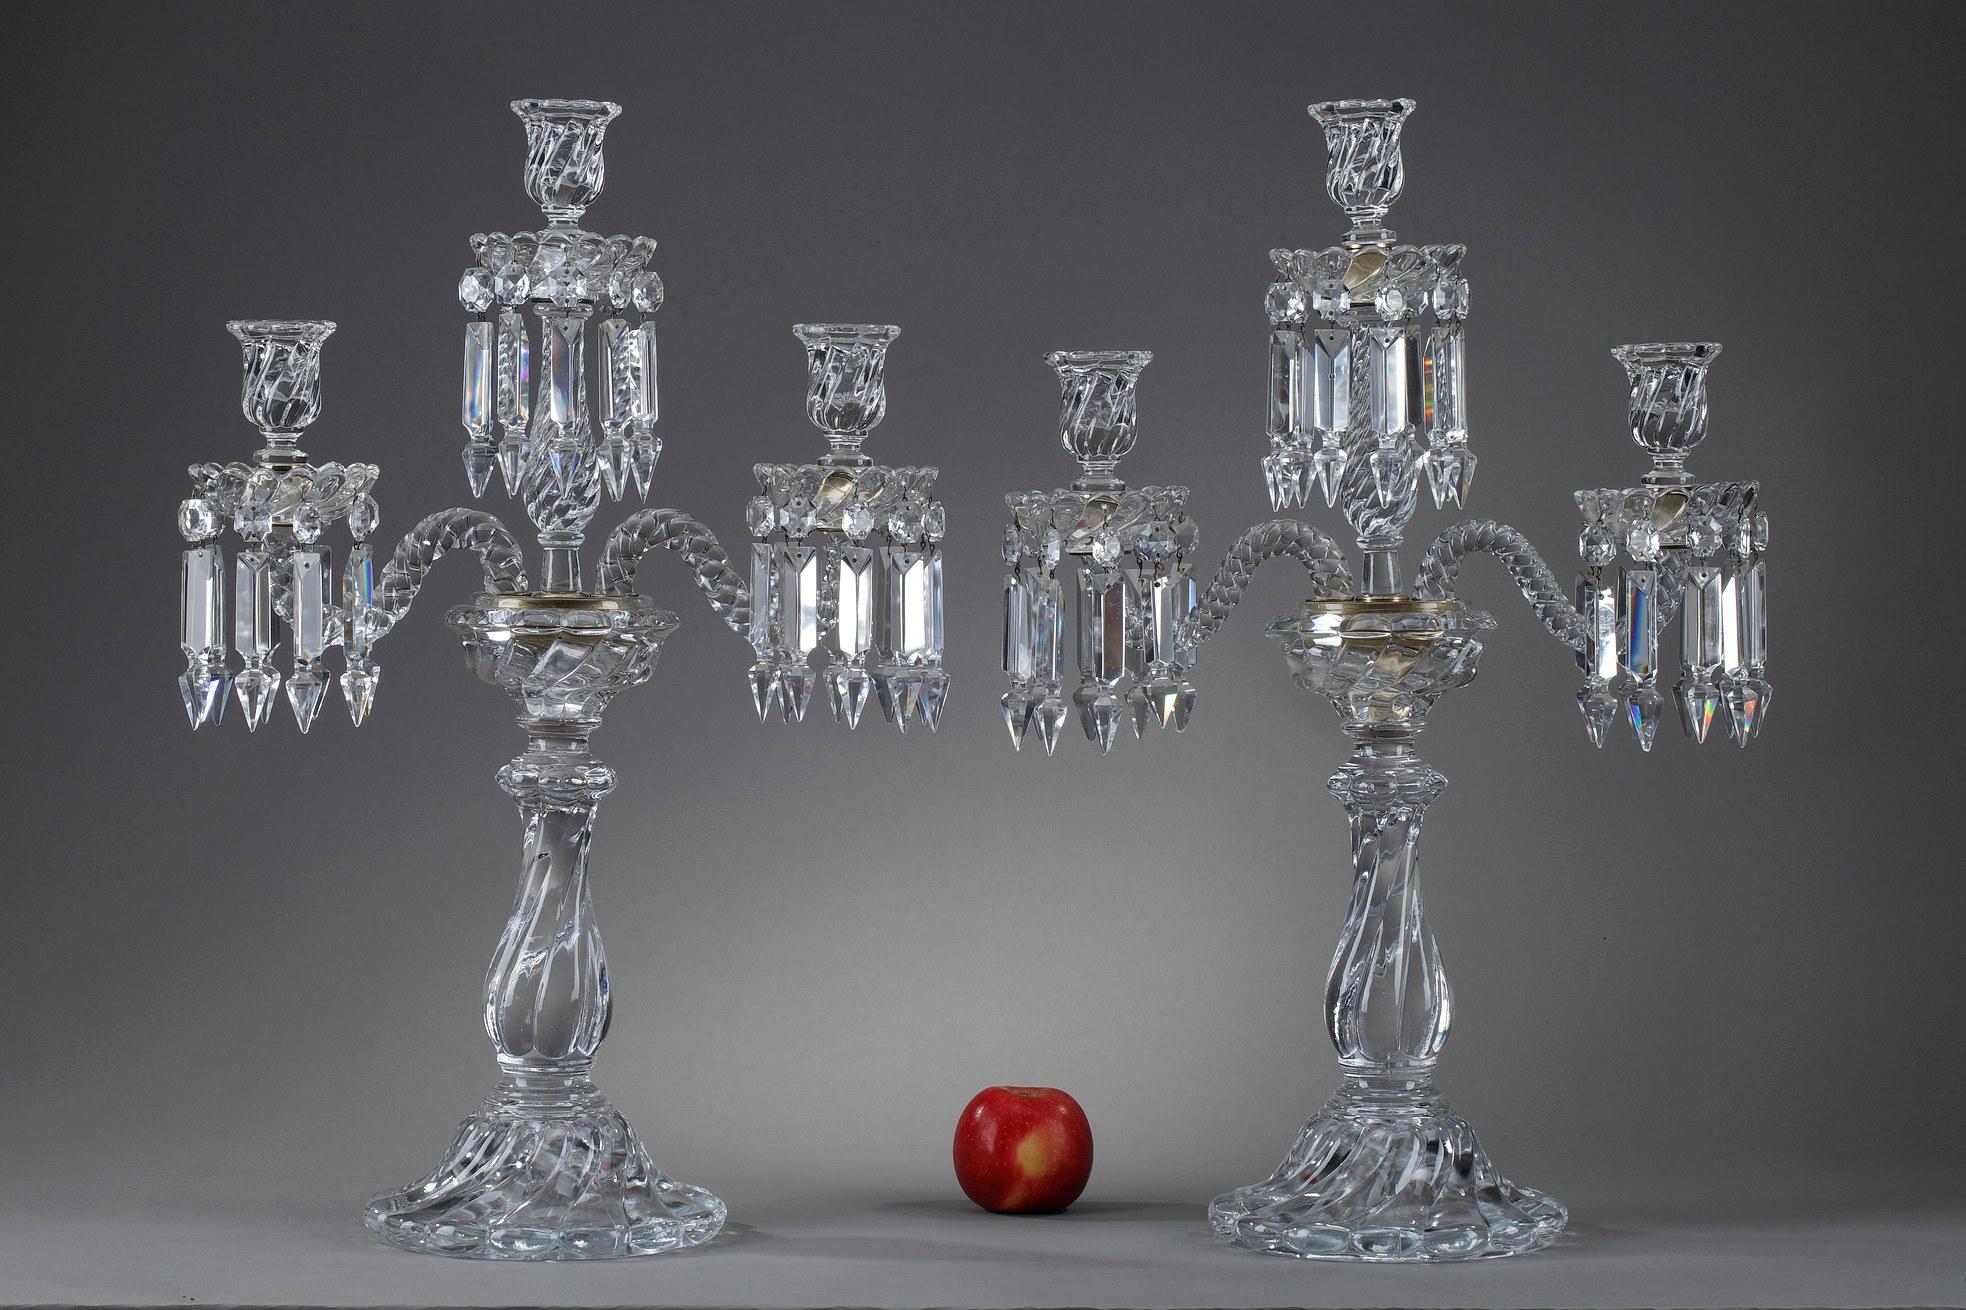 Pair of Baccarat candelabra in molded crystal with three lights decorated with crystal pendants. They are composed of two twisted arms of lights and an upper amount. The shafts are godroned. The bobeches are decorated with twists. The two